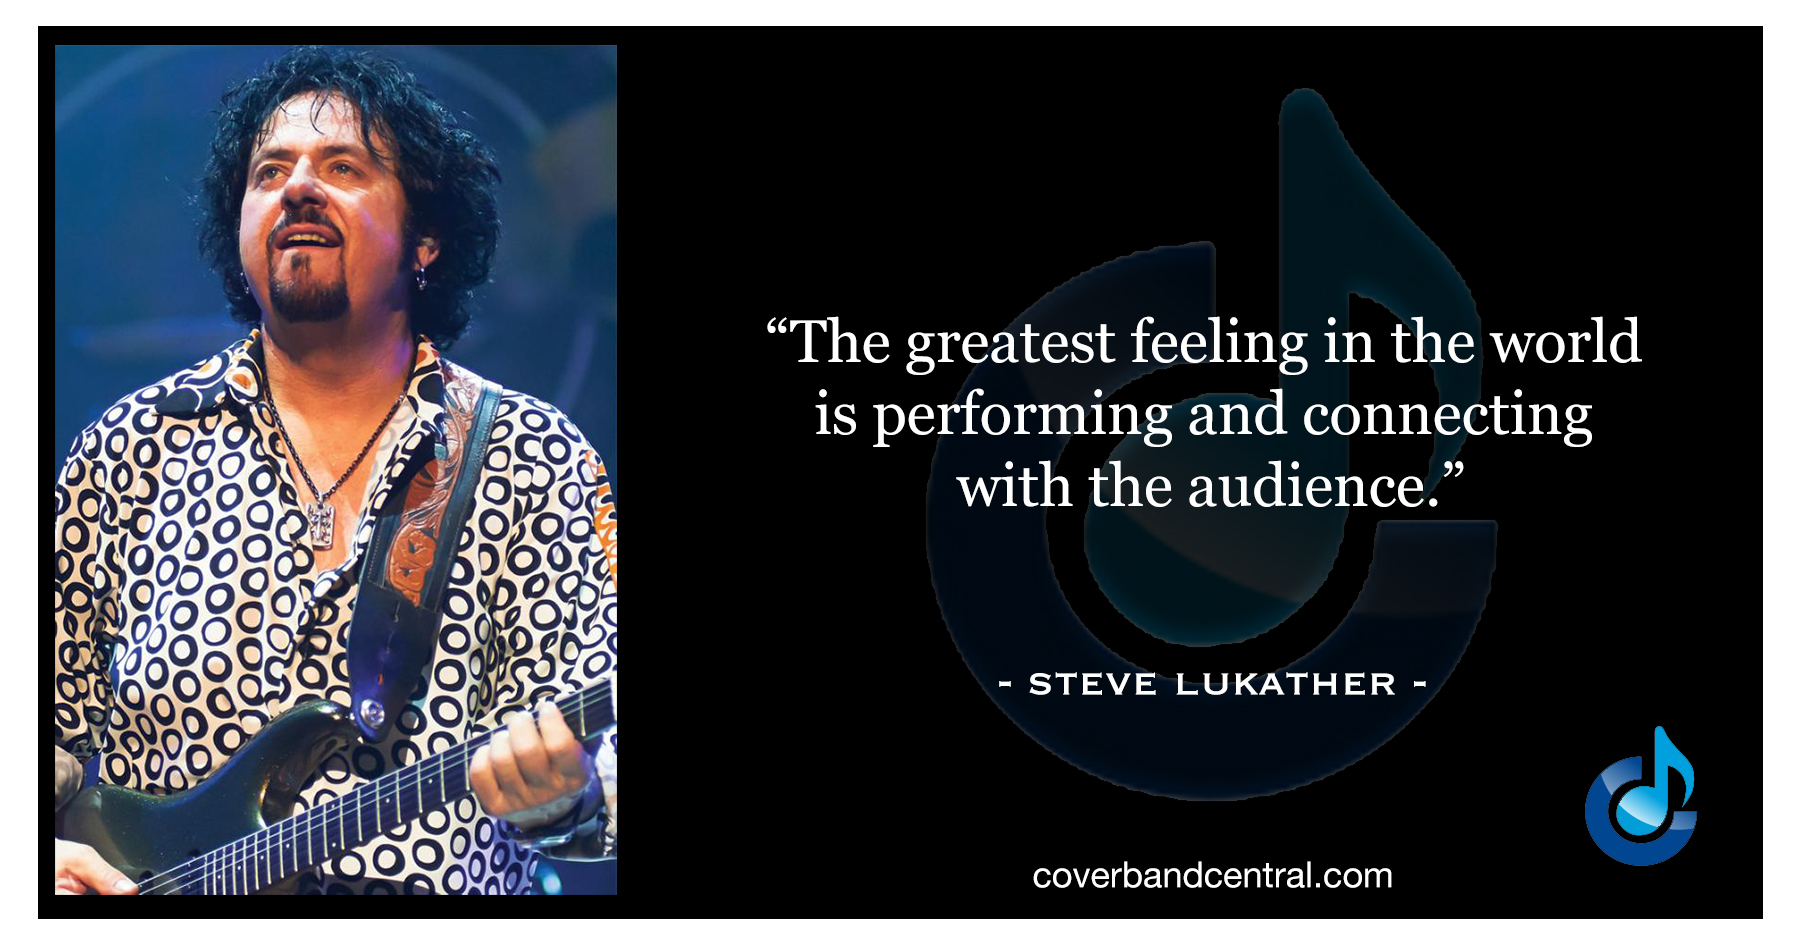 Steve Lukather quote